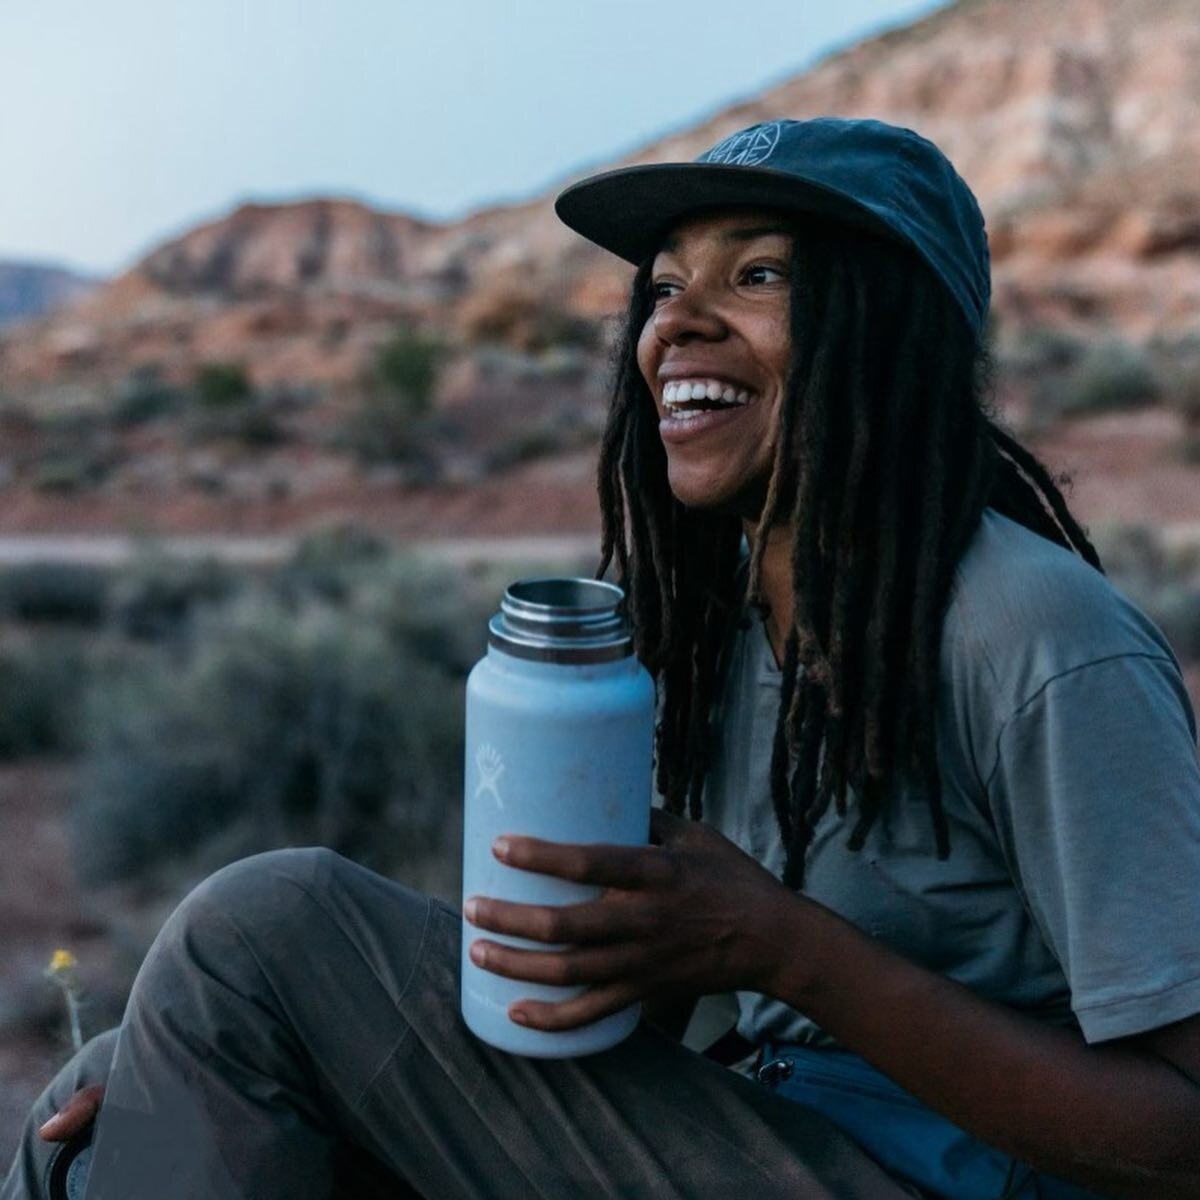 Ice cold water is a treat here in the dessert 🧁 Thanks @hydroflask for keeping me hydrated.
.

If you are in need of a reusable insulated water bottle check out Backcountry.com and use code BROOKLYN15 for 15% off your first purchase (exclusions appl